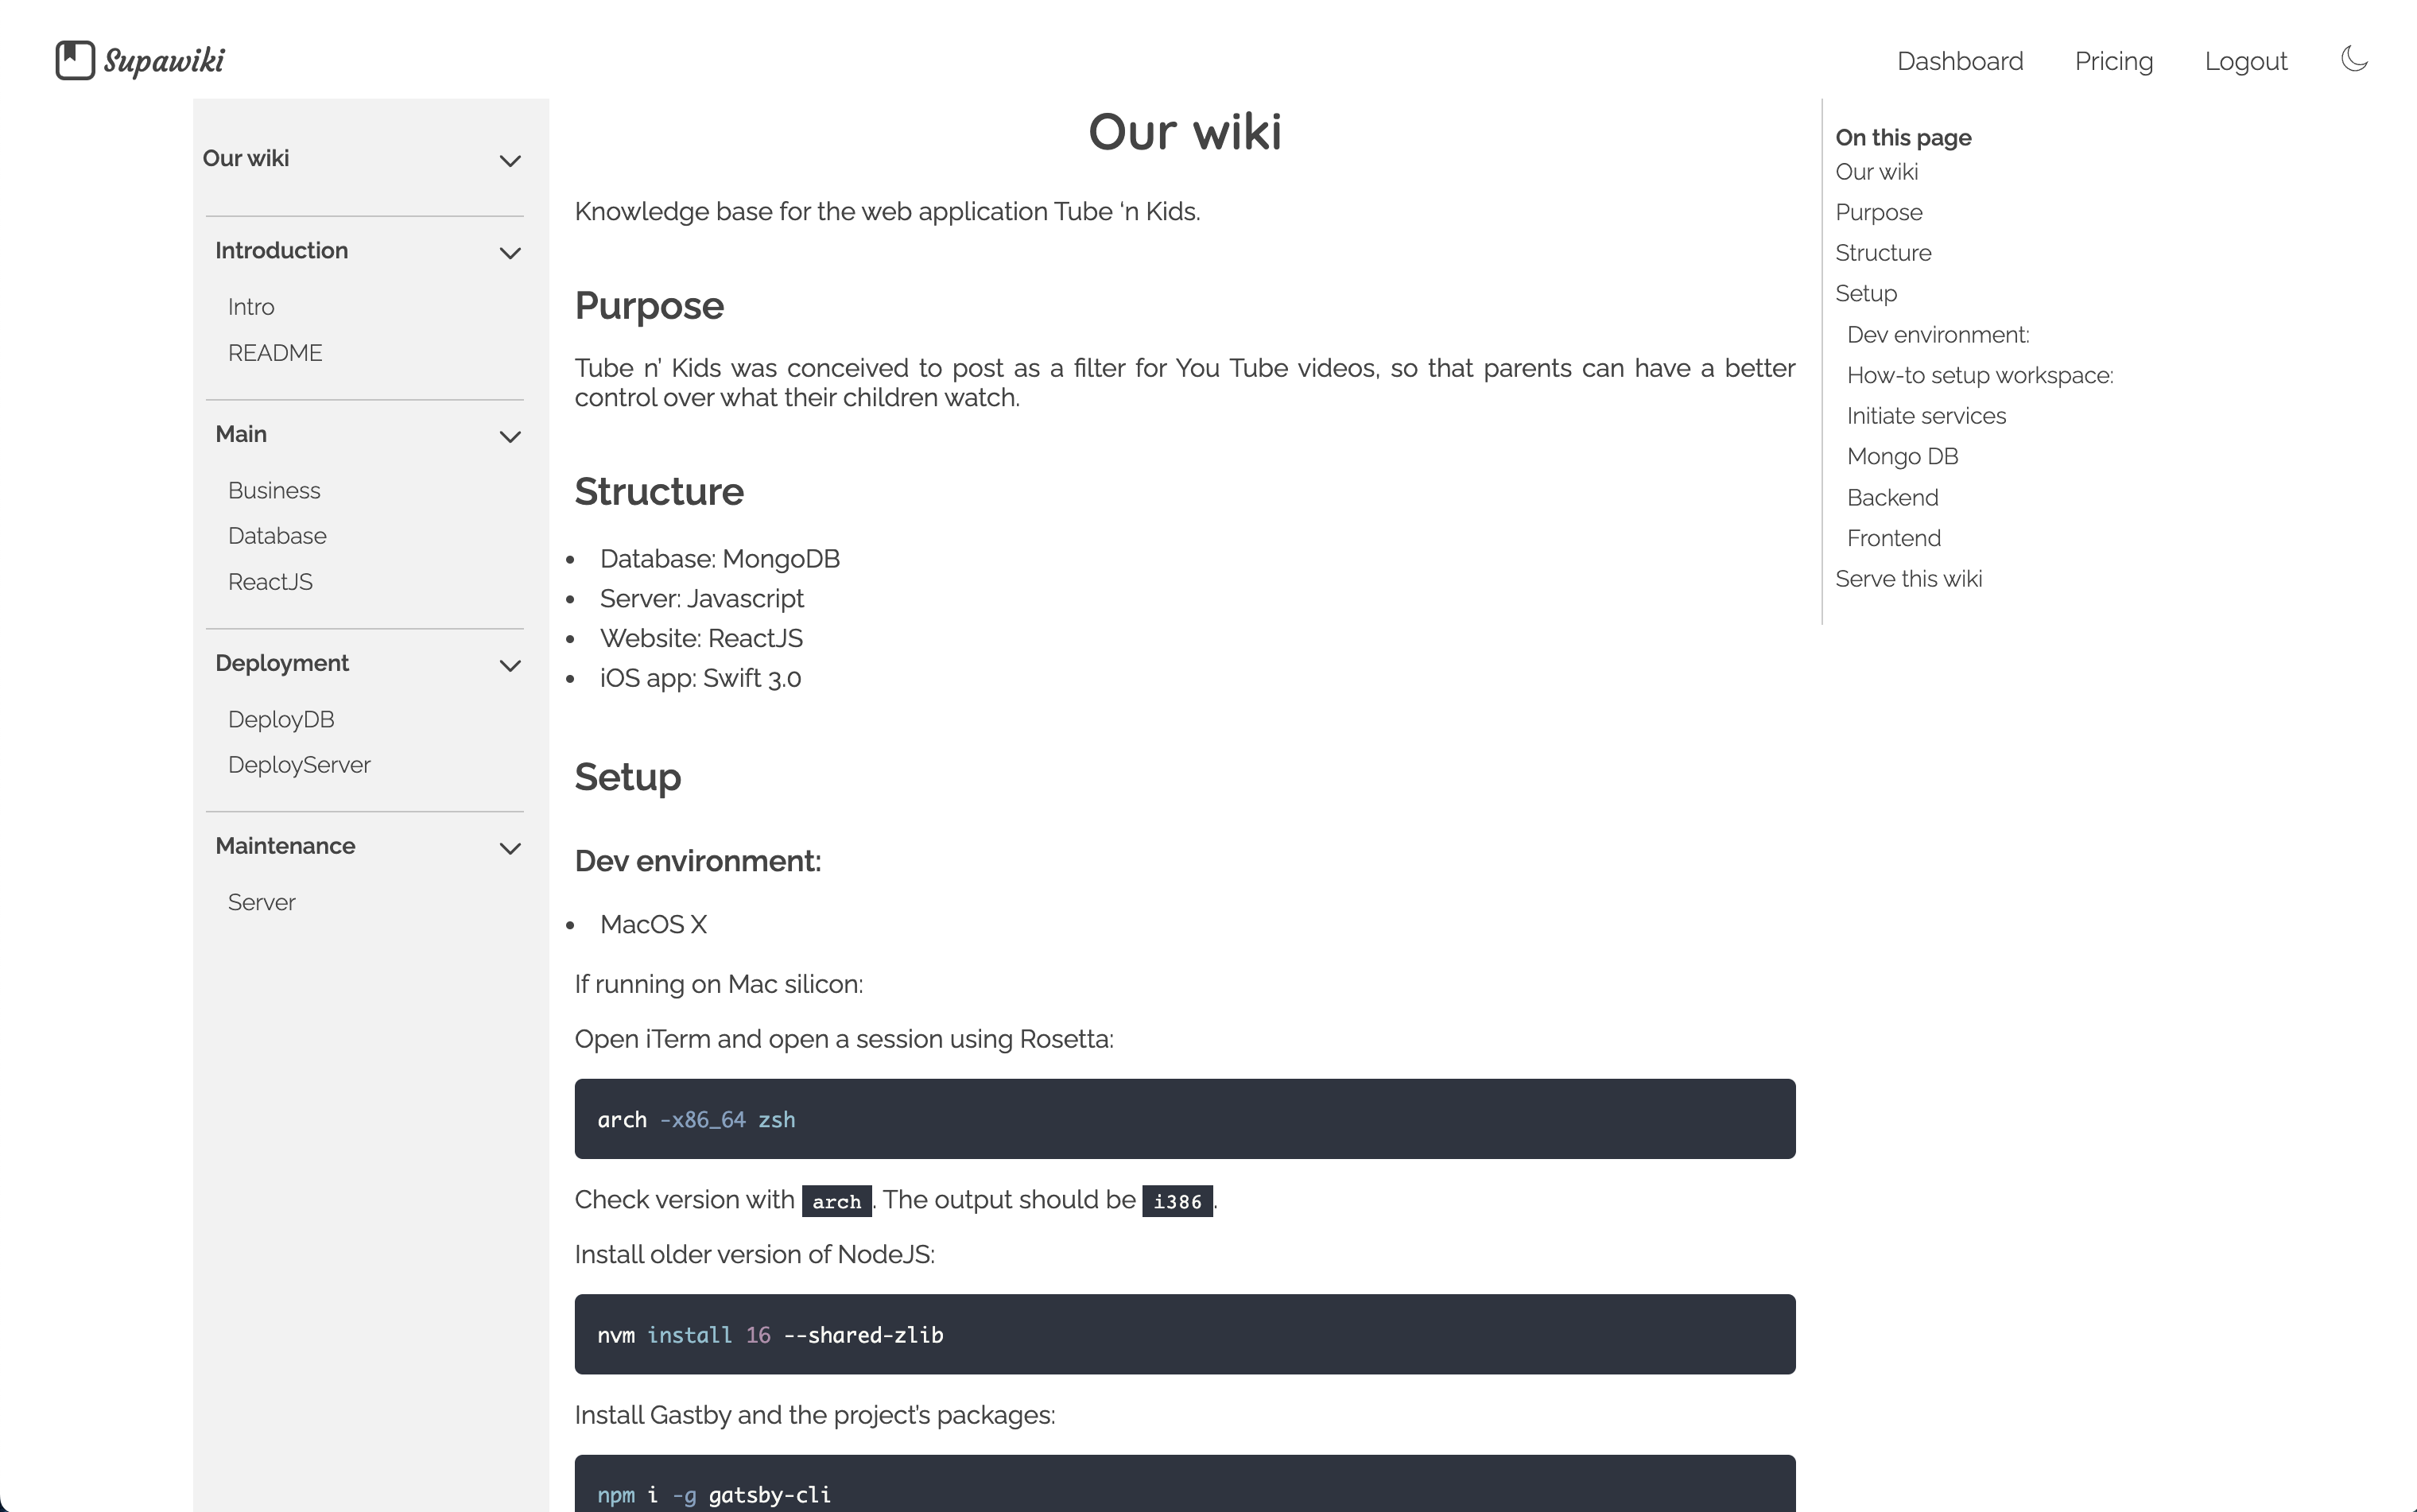 View of a wiki page created with Supawiki